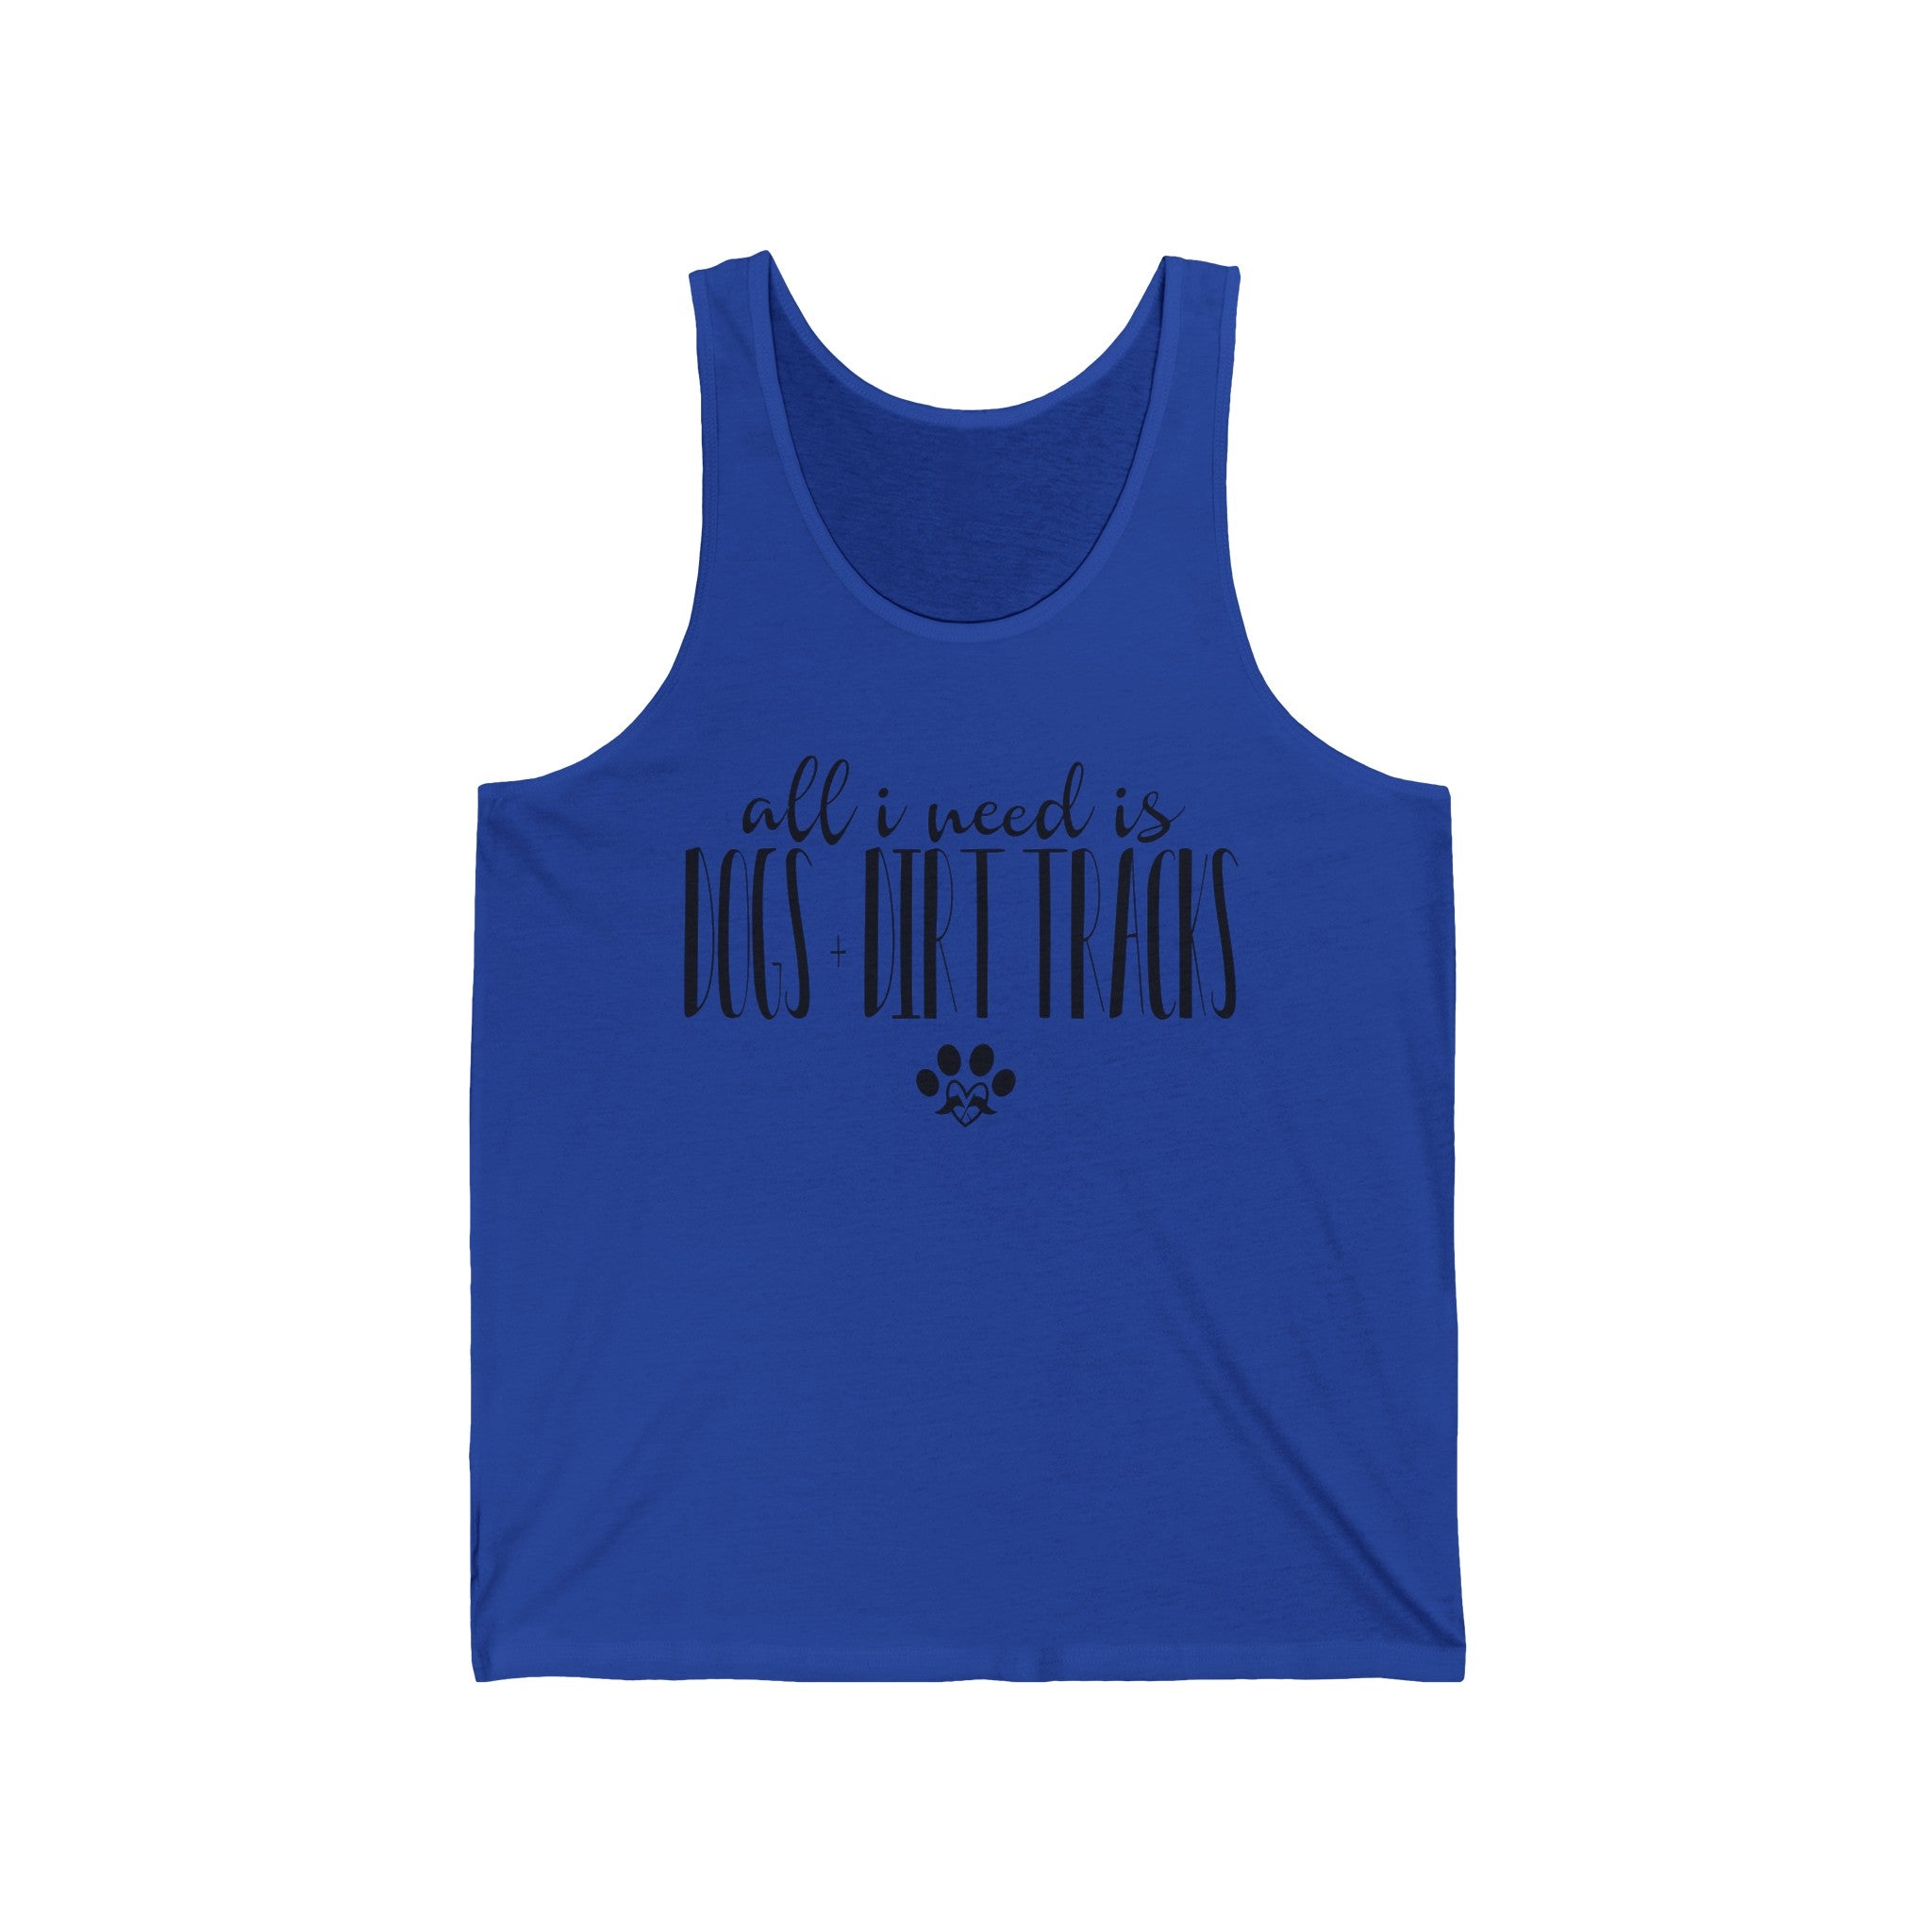 All I Need is Dogs + Dirt Tracks Unisex Tank Top for Summer Racedays